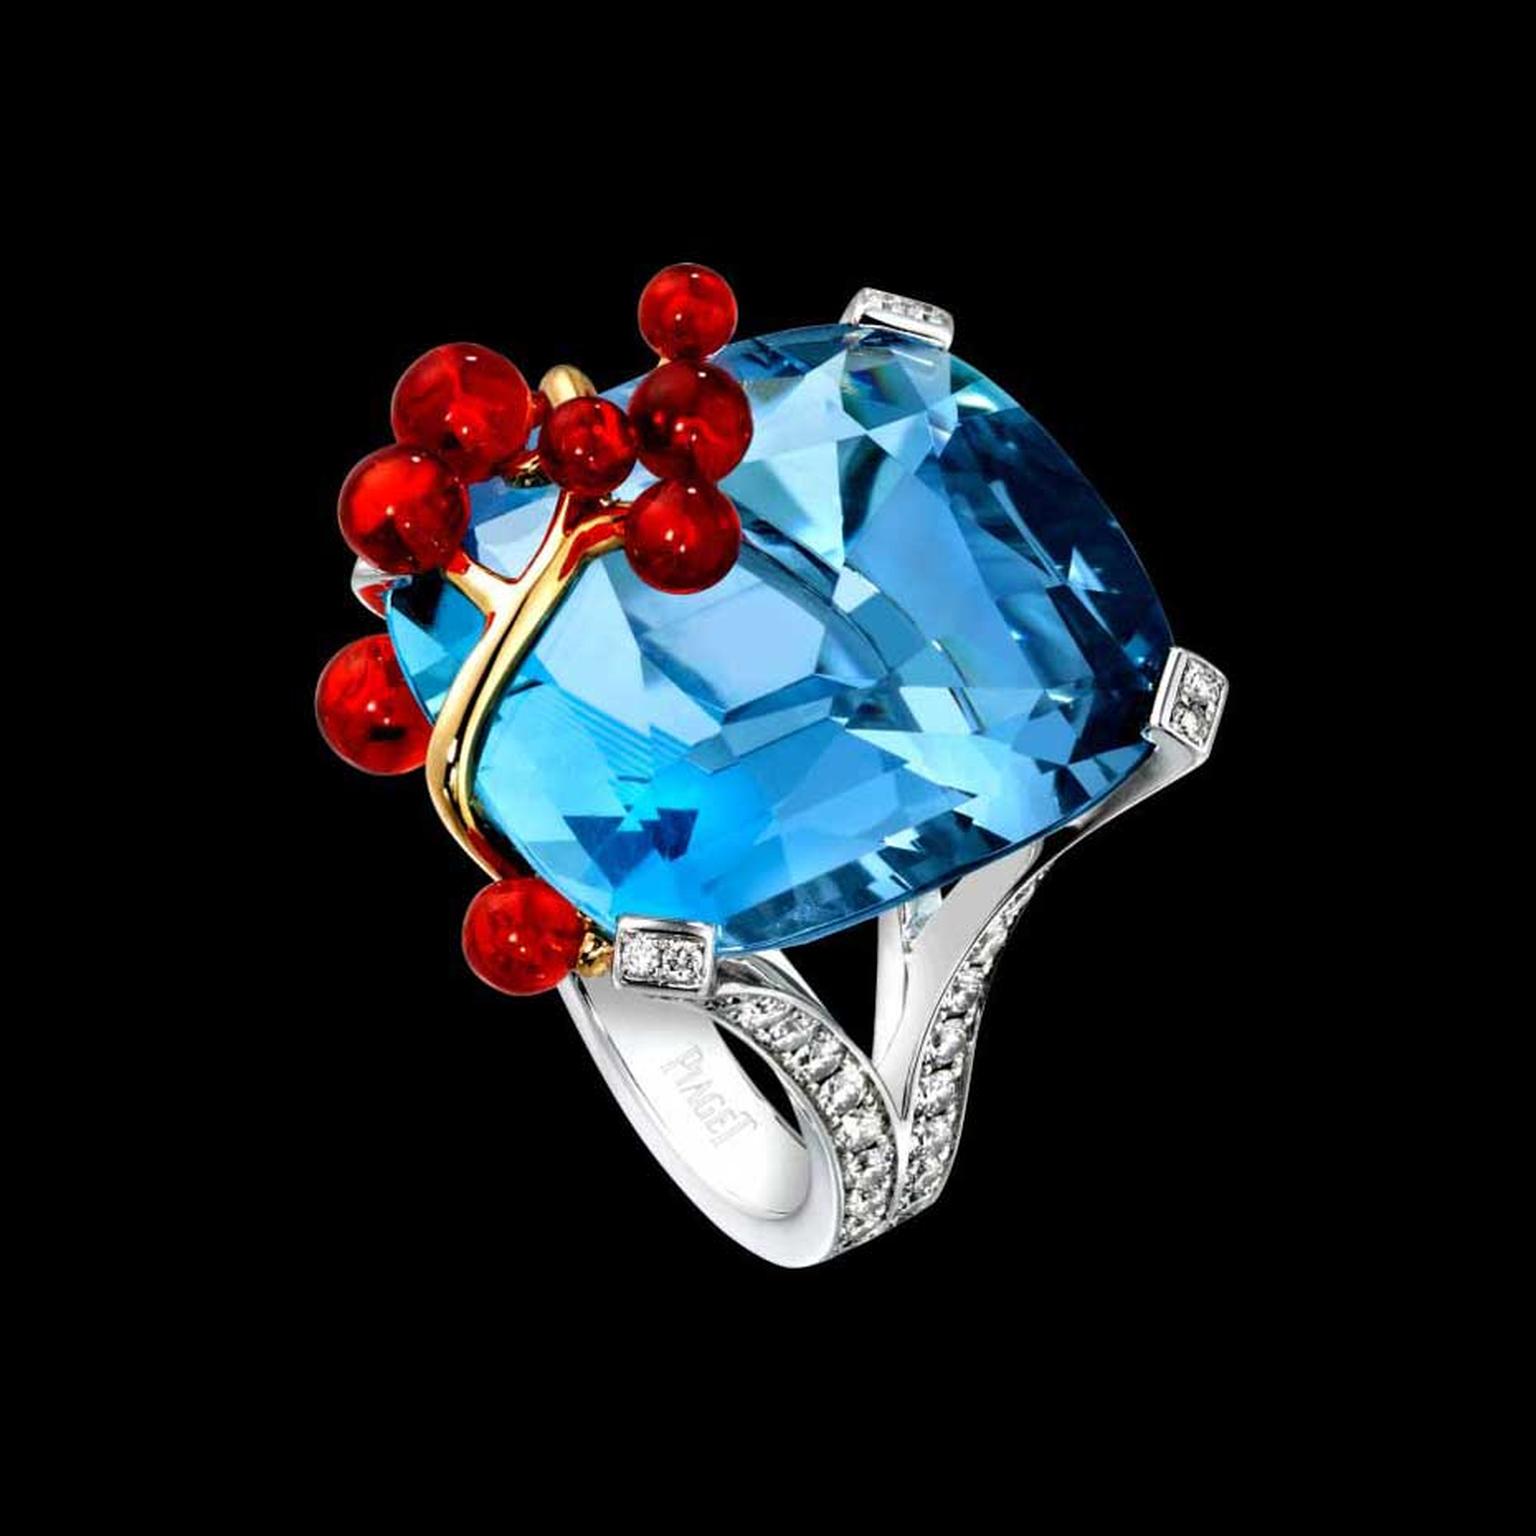 The Limelight Blue Lagoon cocktail inspiration ring from Piaget is set in white gold with a cushion-cut aquamarine, brilliant-cut fire opals and brilliant-cut diamonds.